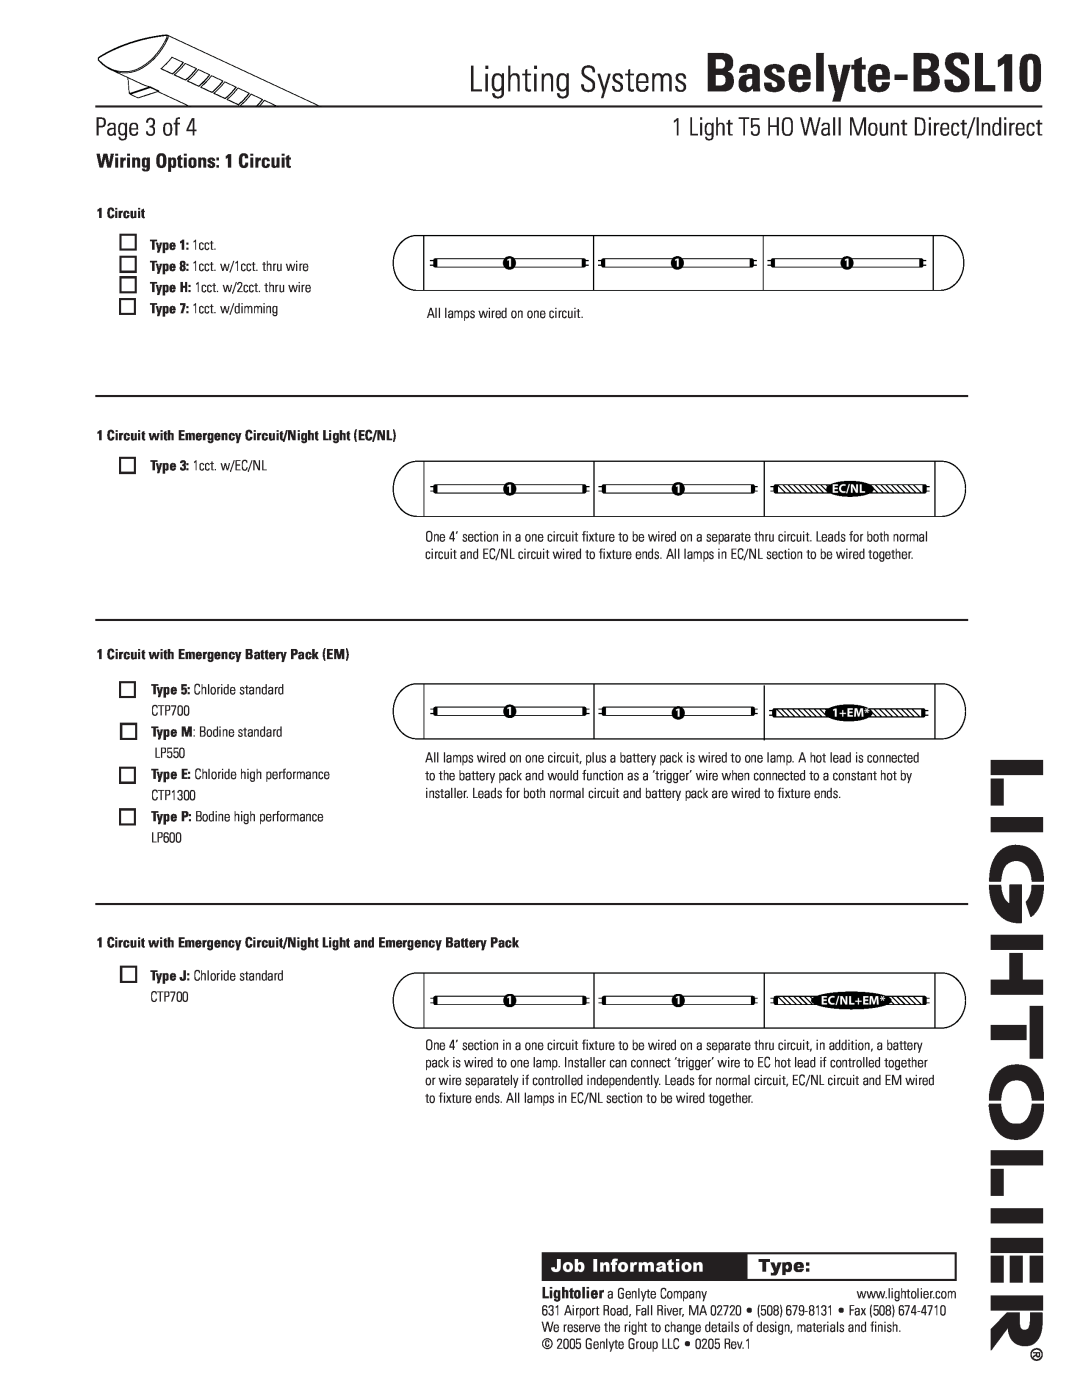 Lightolier Baselyte-BSL10 Page of, Wiring Options 1 Circuit, Circuit Type 1 1cct, Circuit with Emergency Battery Pack EM 